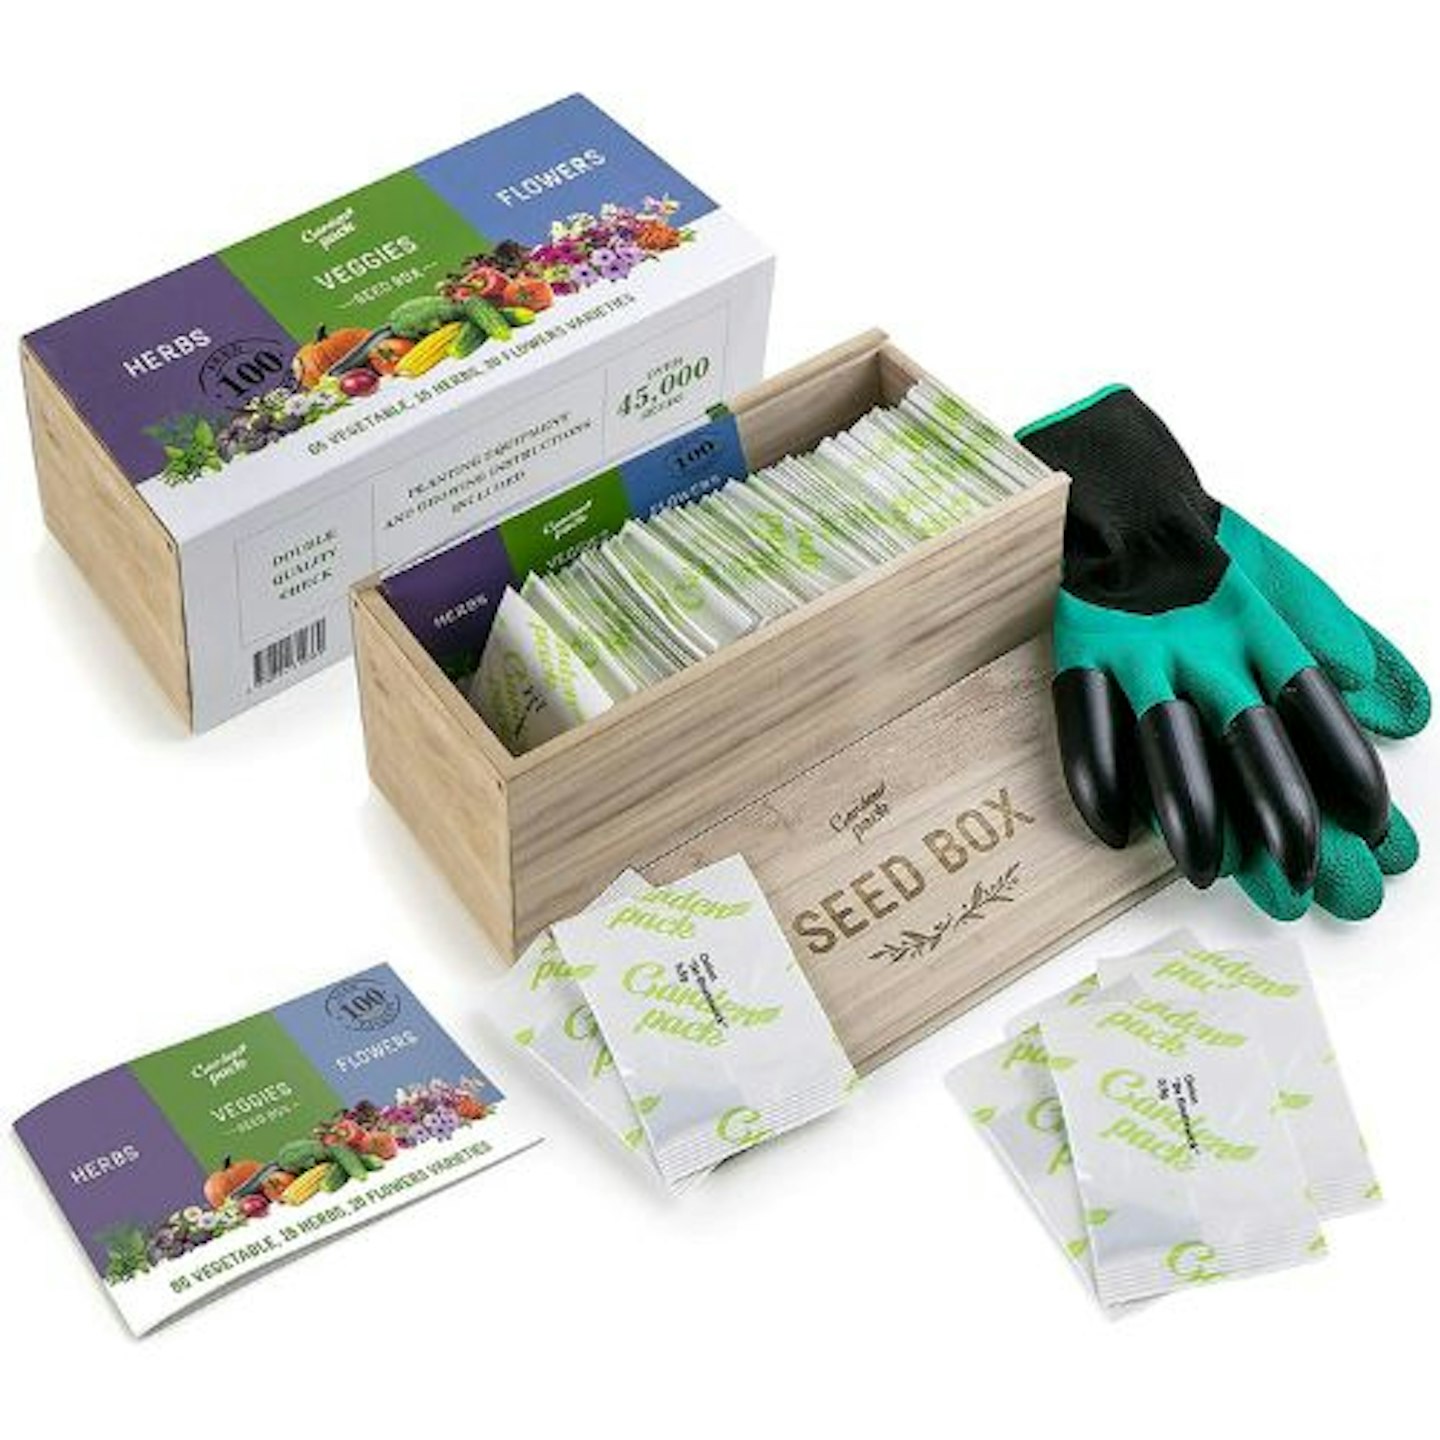 Grow Your Own Seed Box by Garden Pack - 100 Varieties of Flower, Herb, Vegetable Seeds - Gardening Gifts for Women